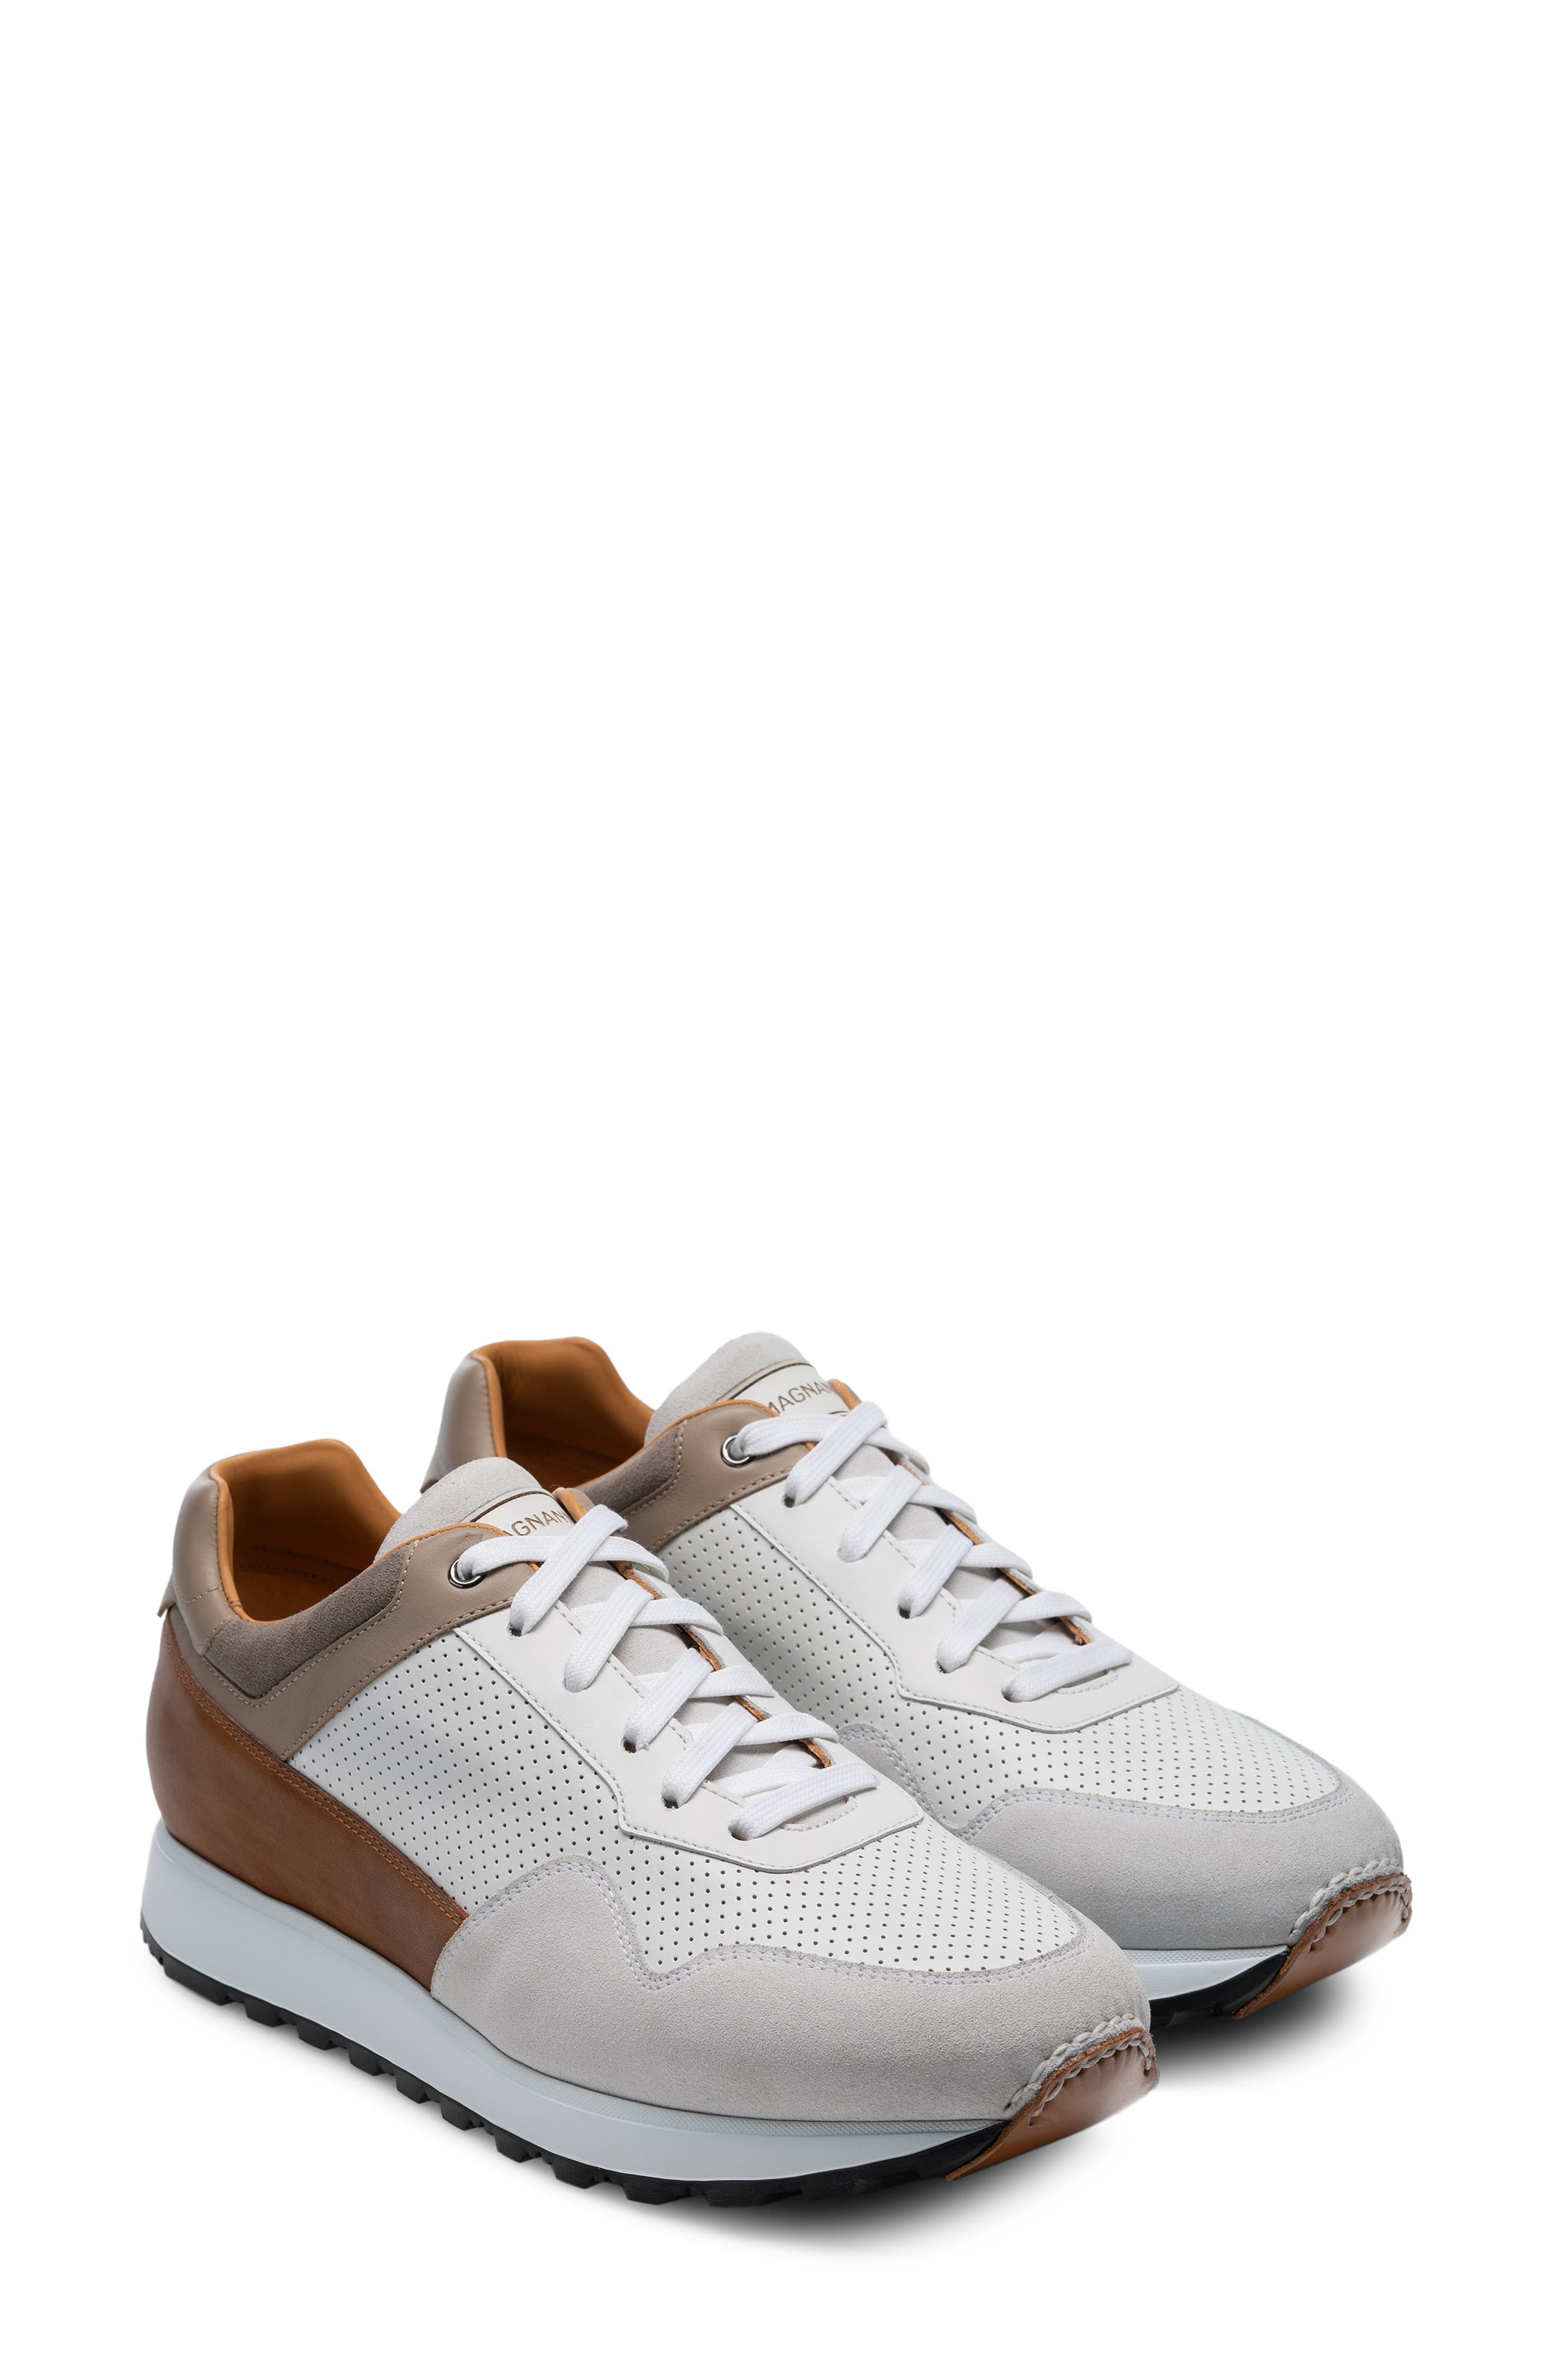 magnanni sneakers nordstrom